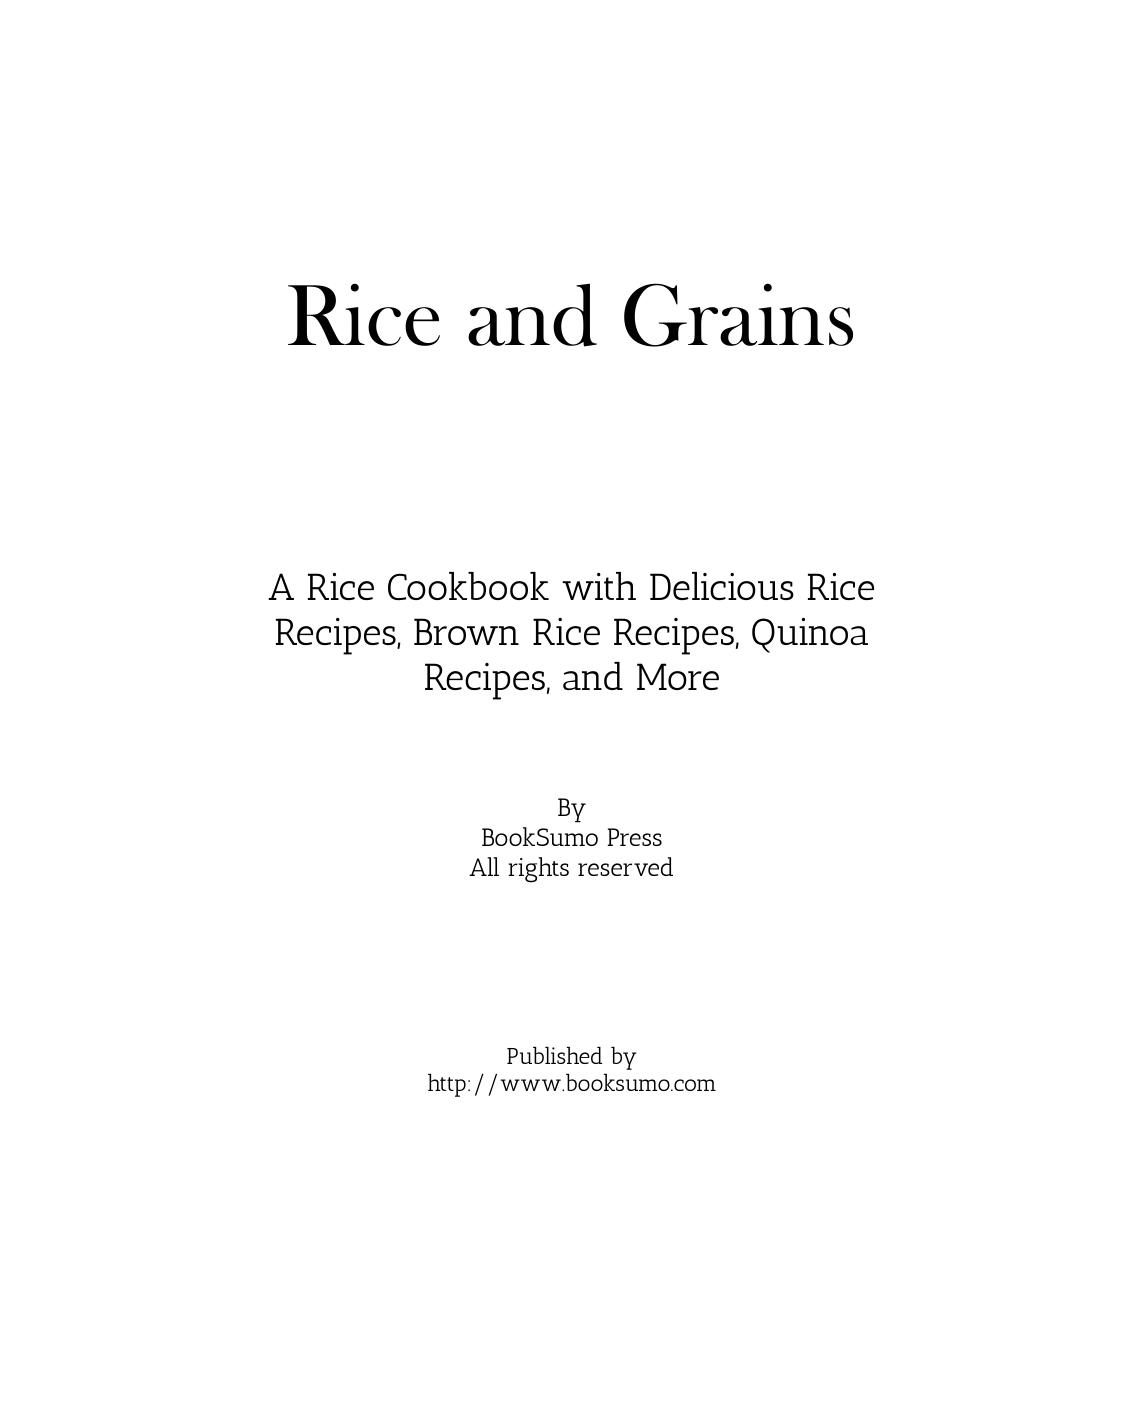 Rice and Grains: A Simple Cookbook with Ideas to Brigten your Favorite Side-Dish by BookSumo Press